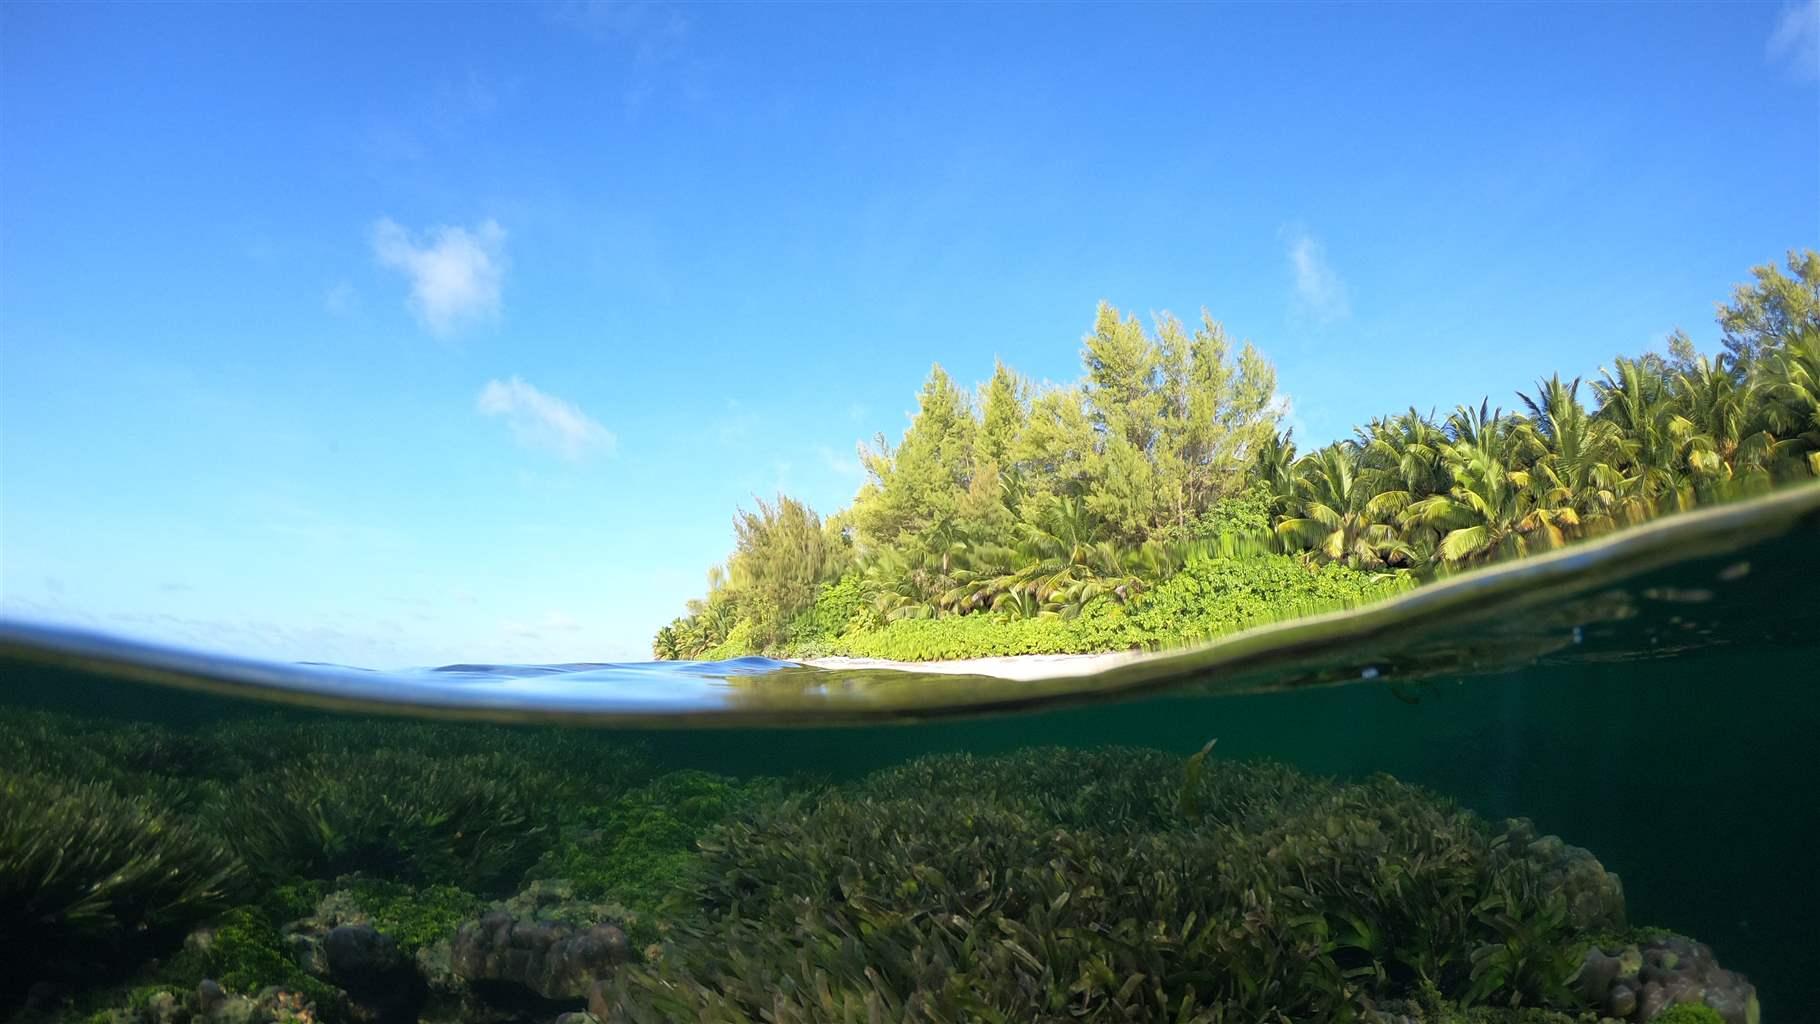 Seagrass meadows, such as this one in Seychelles, are critical ecosystems for marine life and a nature-based solution to climate change.